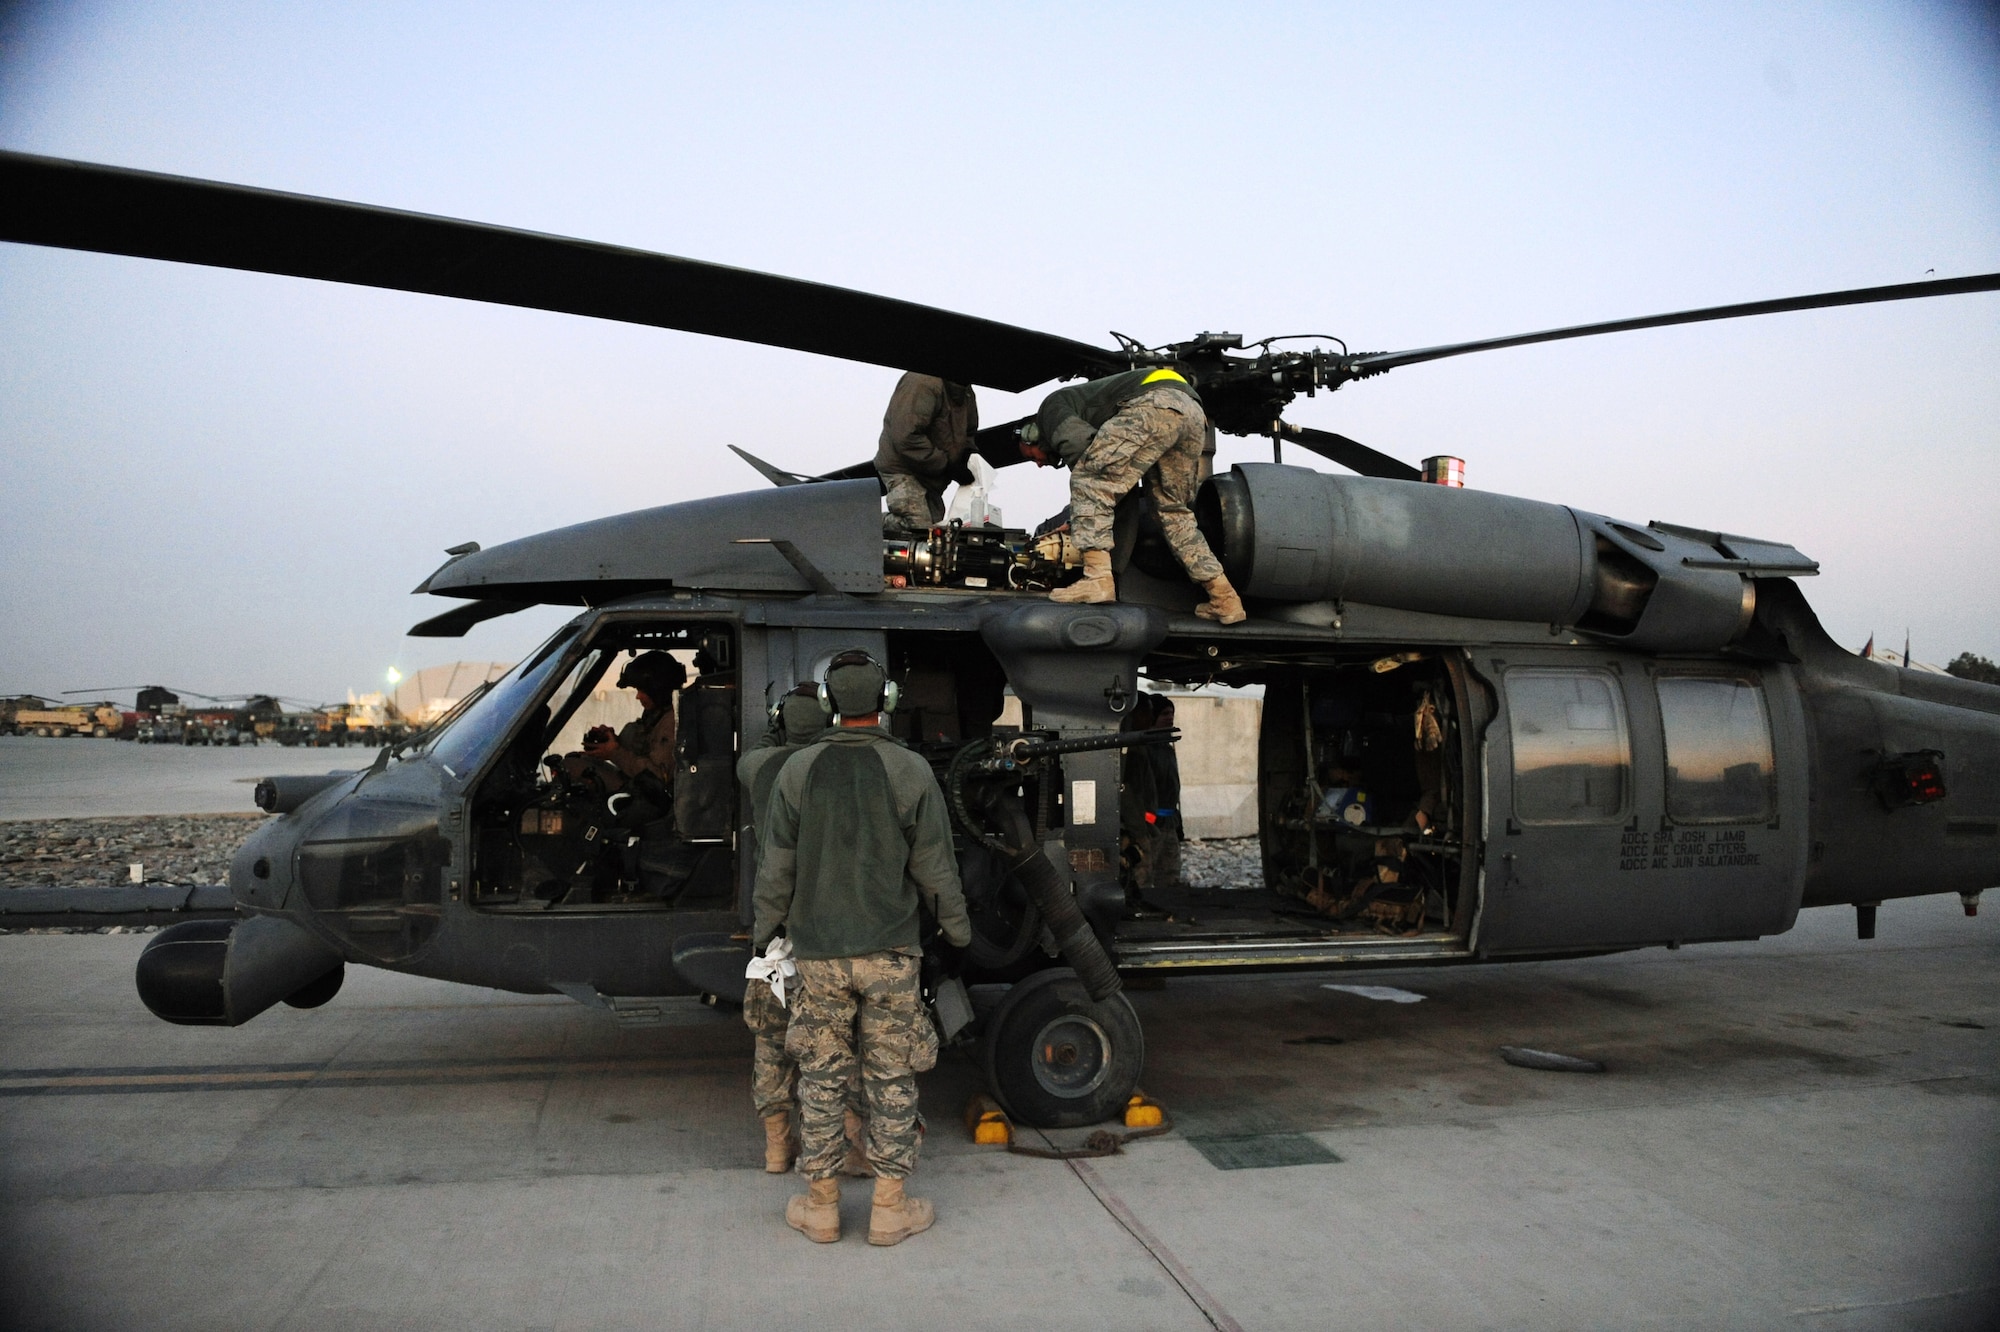 U.S. Air Force aircraft maintenance Airmen from the 66th Expeditionary Rescue squadron  perform minor maintenance on an alert HH-60G Pave Hawk after a medical evacuation mission Jan. 10, 2010, at Kandahar Airfield, Afghanistan. (U.S. Air Force photo/Staff Sgt. Manuel J. Martinez/Released)